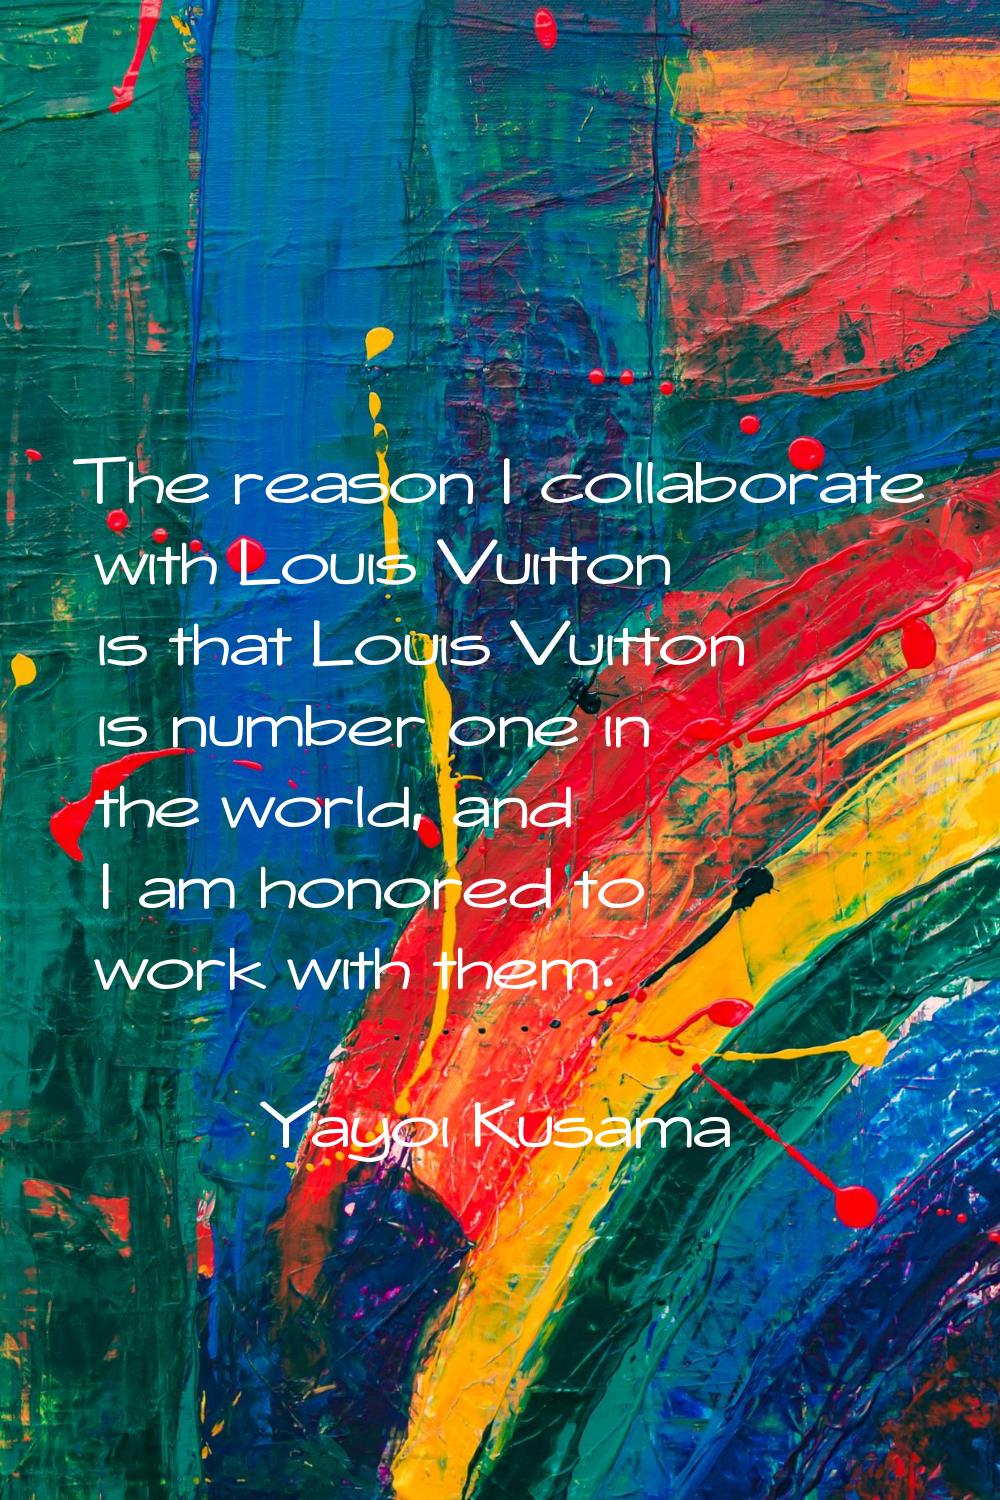 The reason I collaborate with Louis Vuitton is that Louis Vuitton is number one in the world, and I